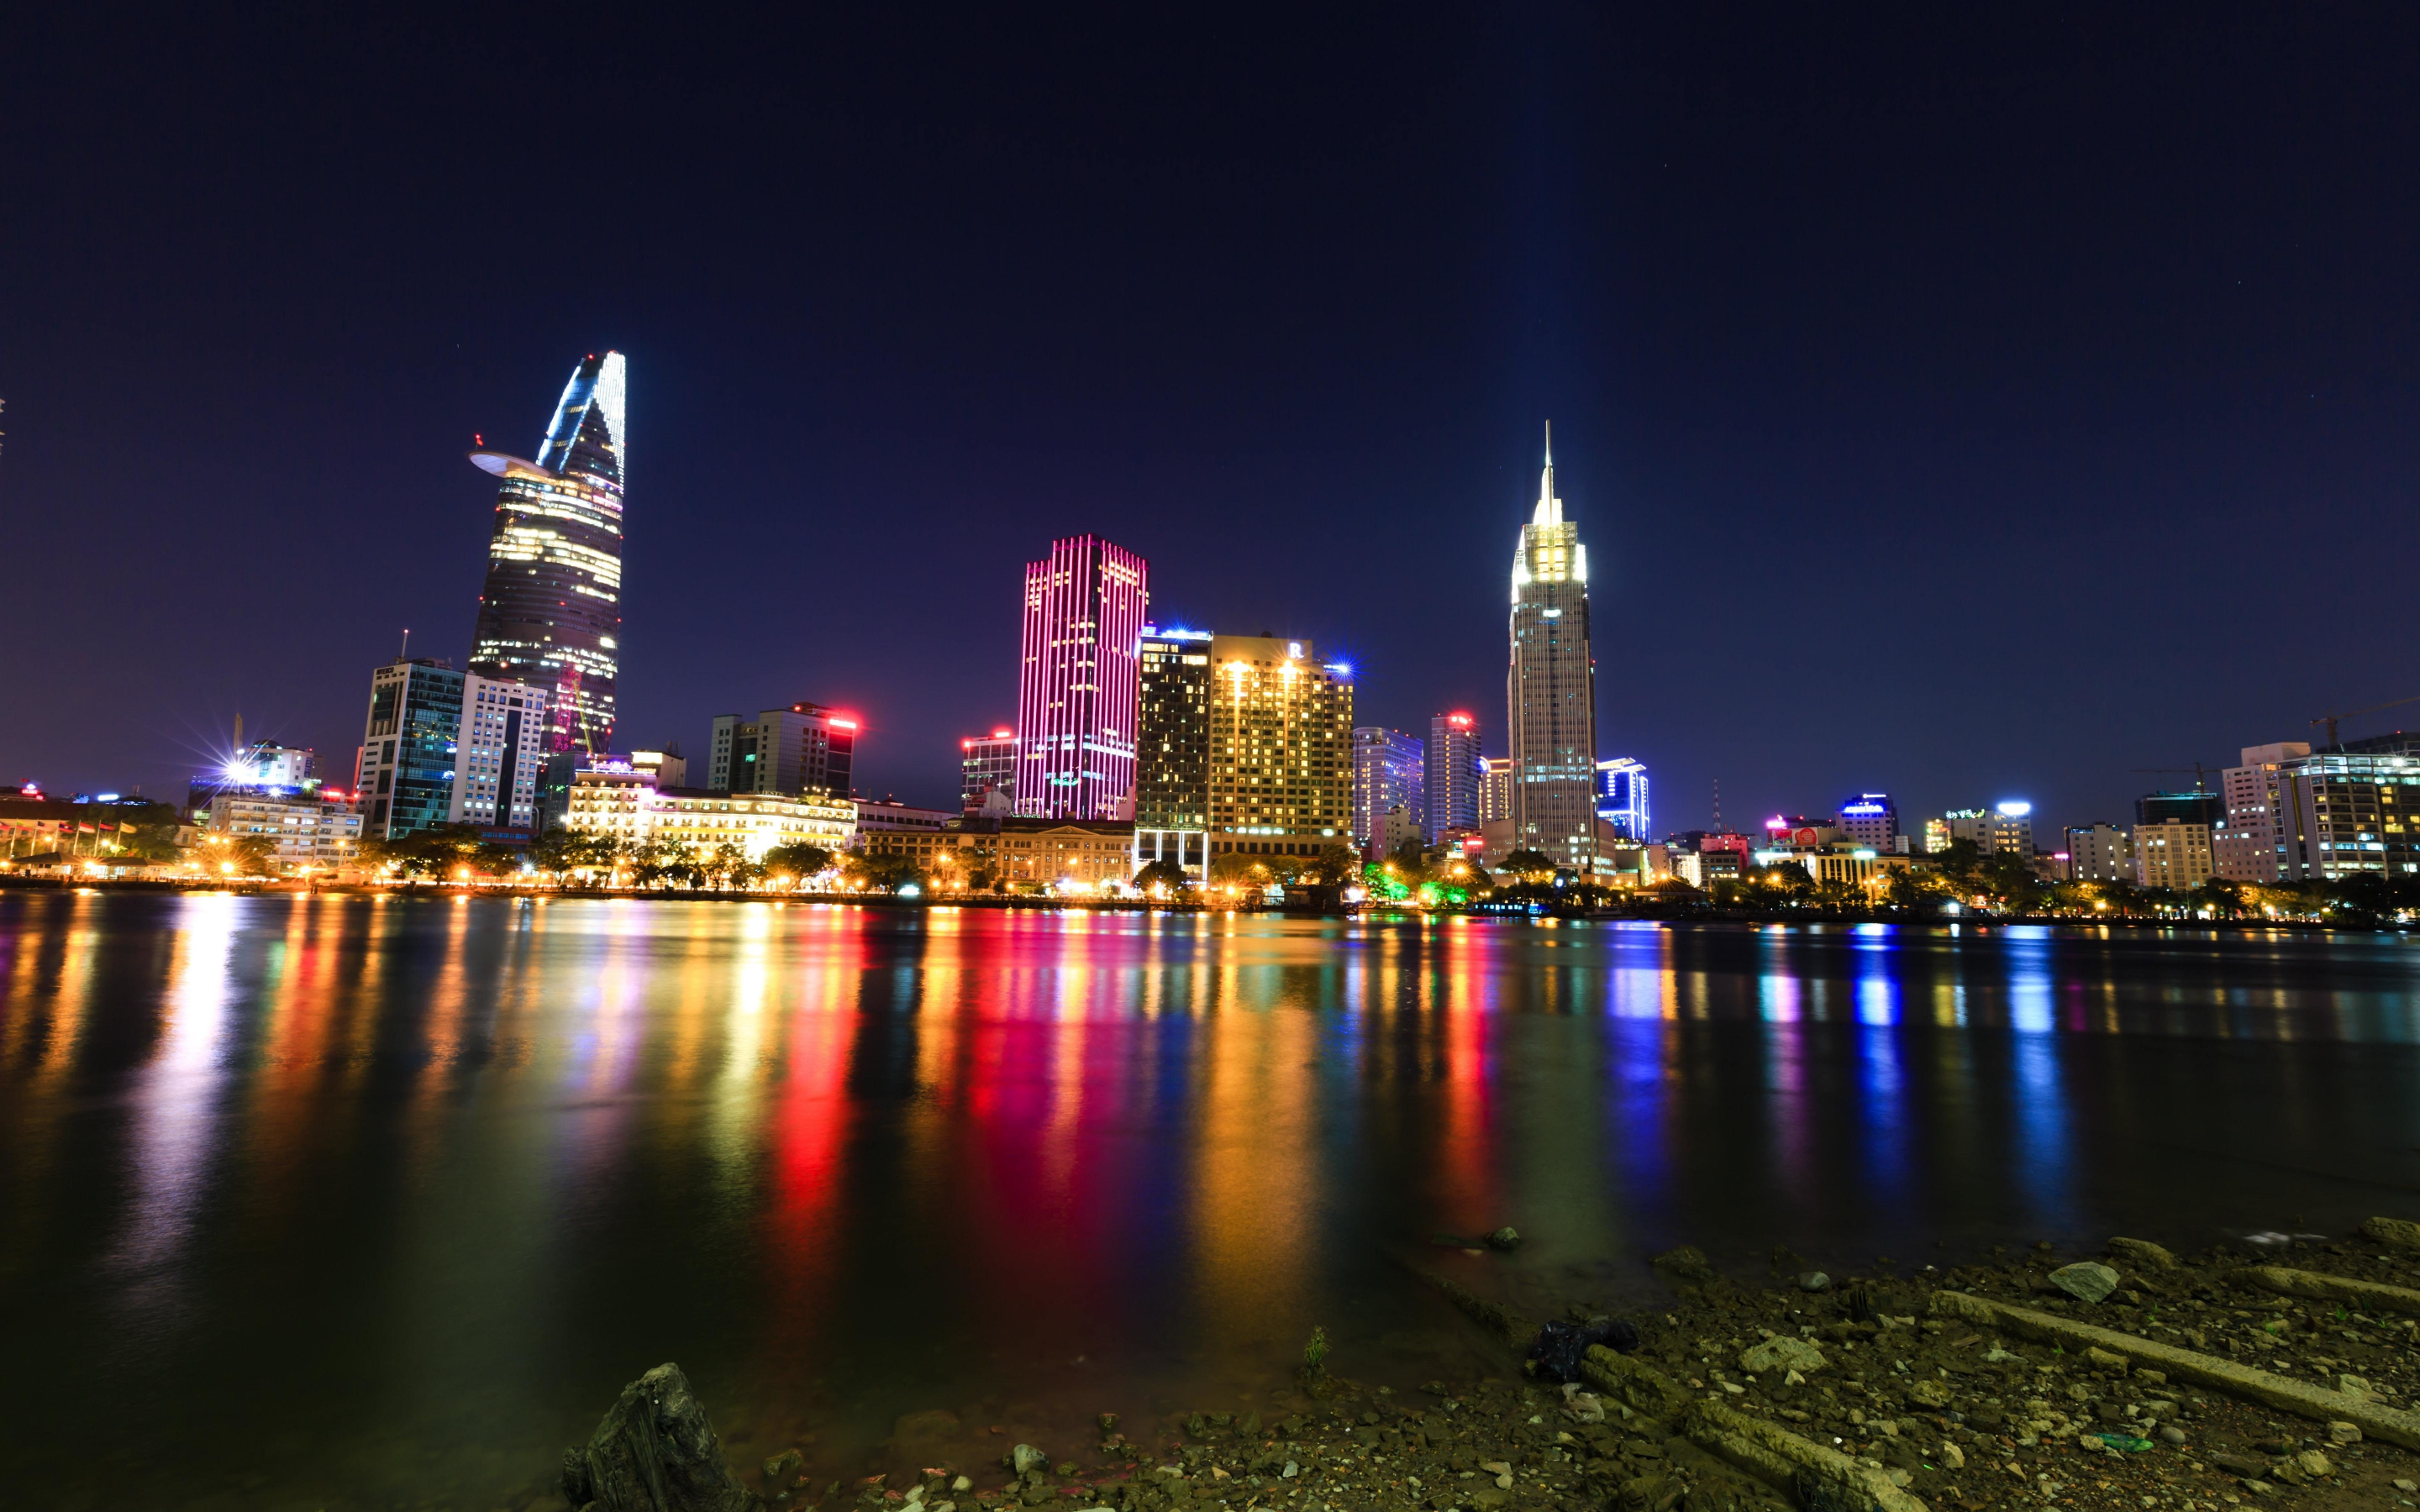 Glow, city lights, colorful, reflections, cityscape, night, 2880x1800 wallpaper